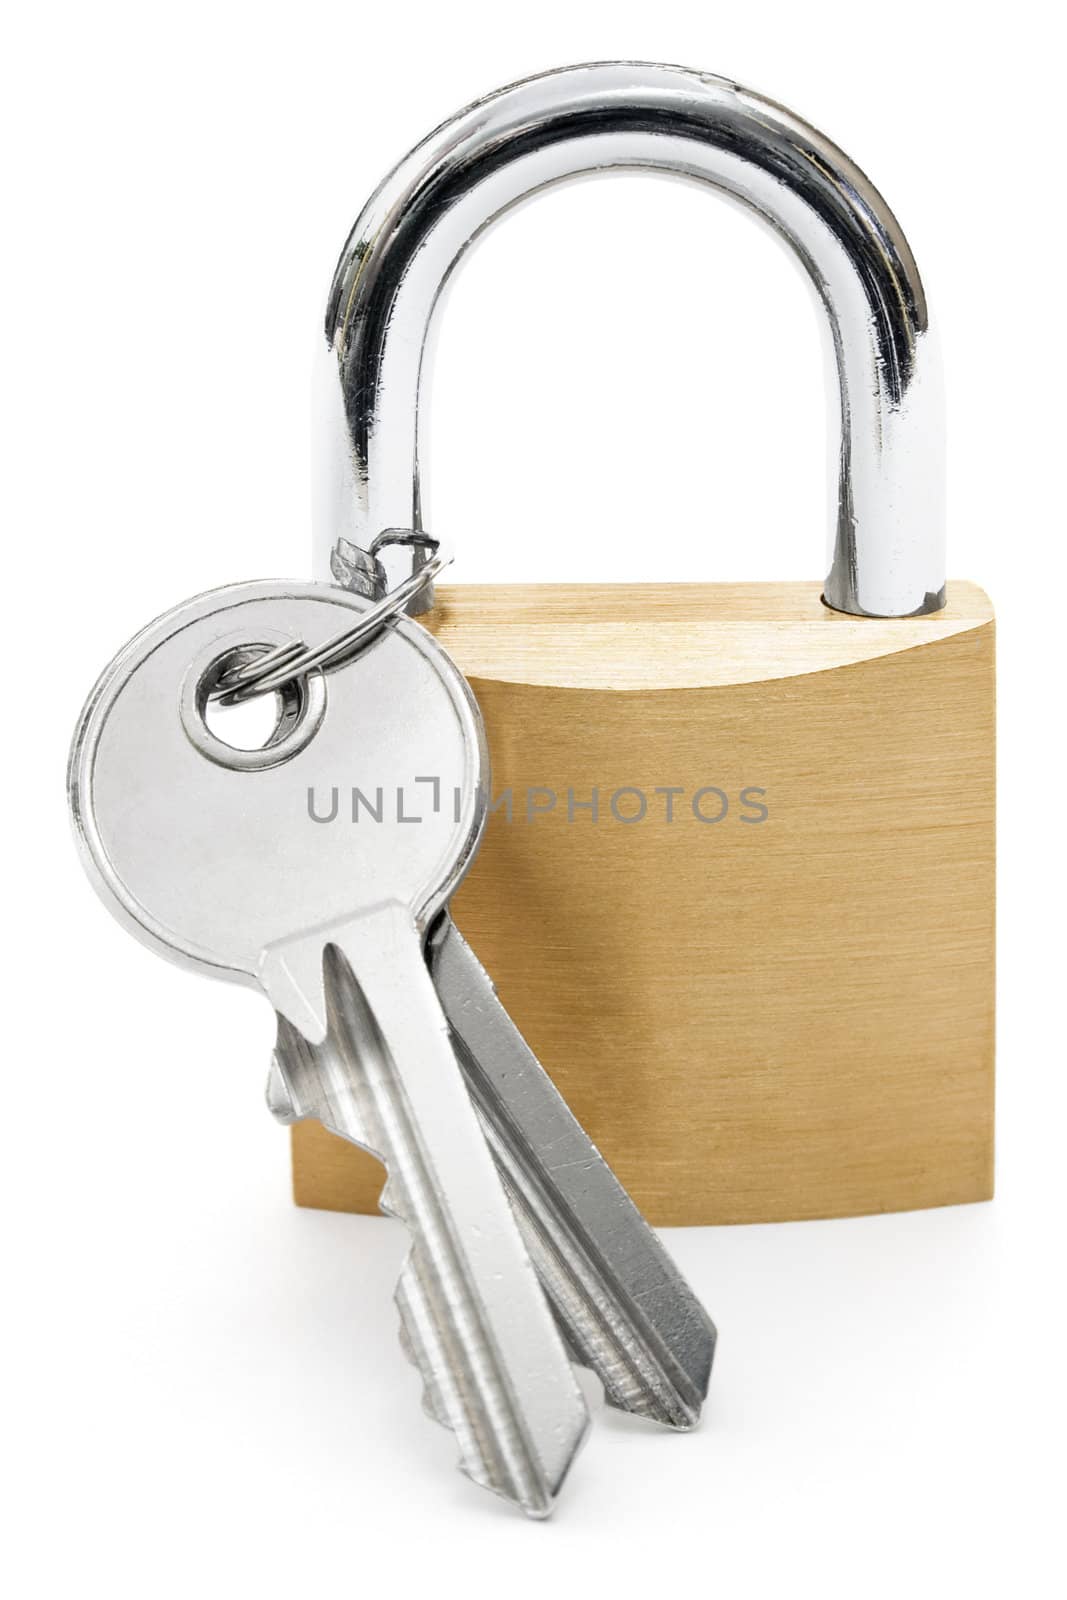 Two keys attached to a common padlock.